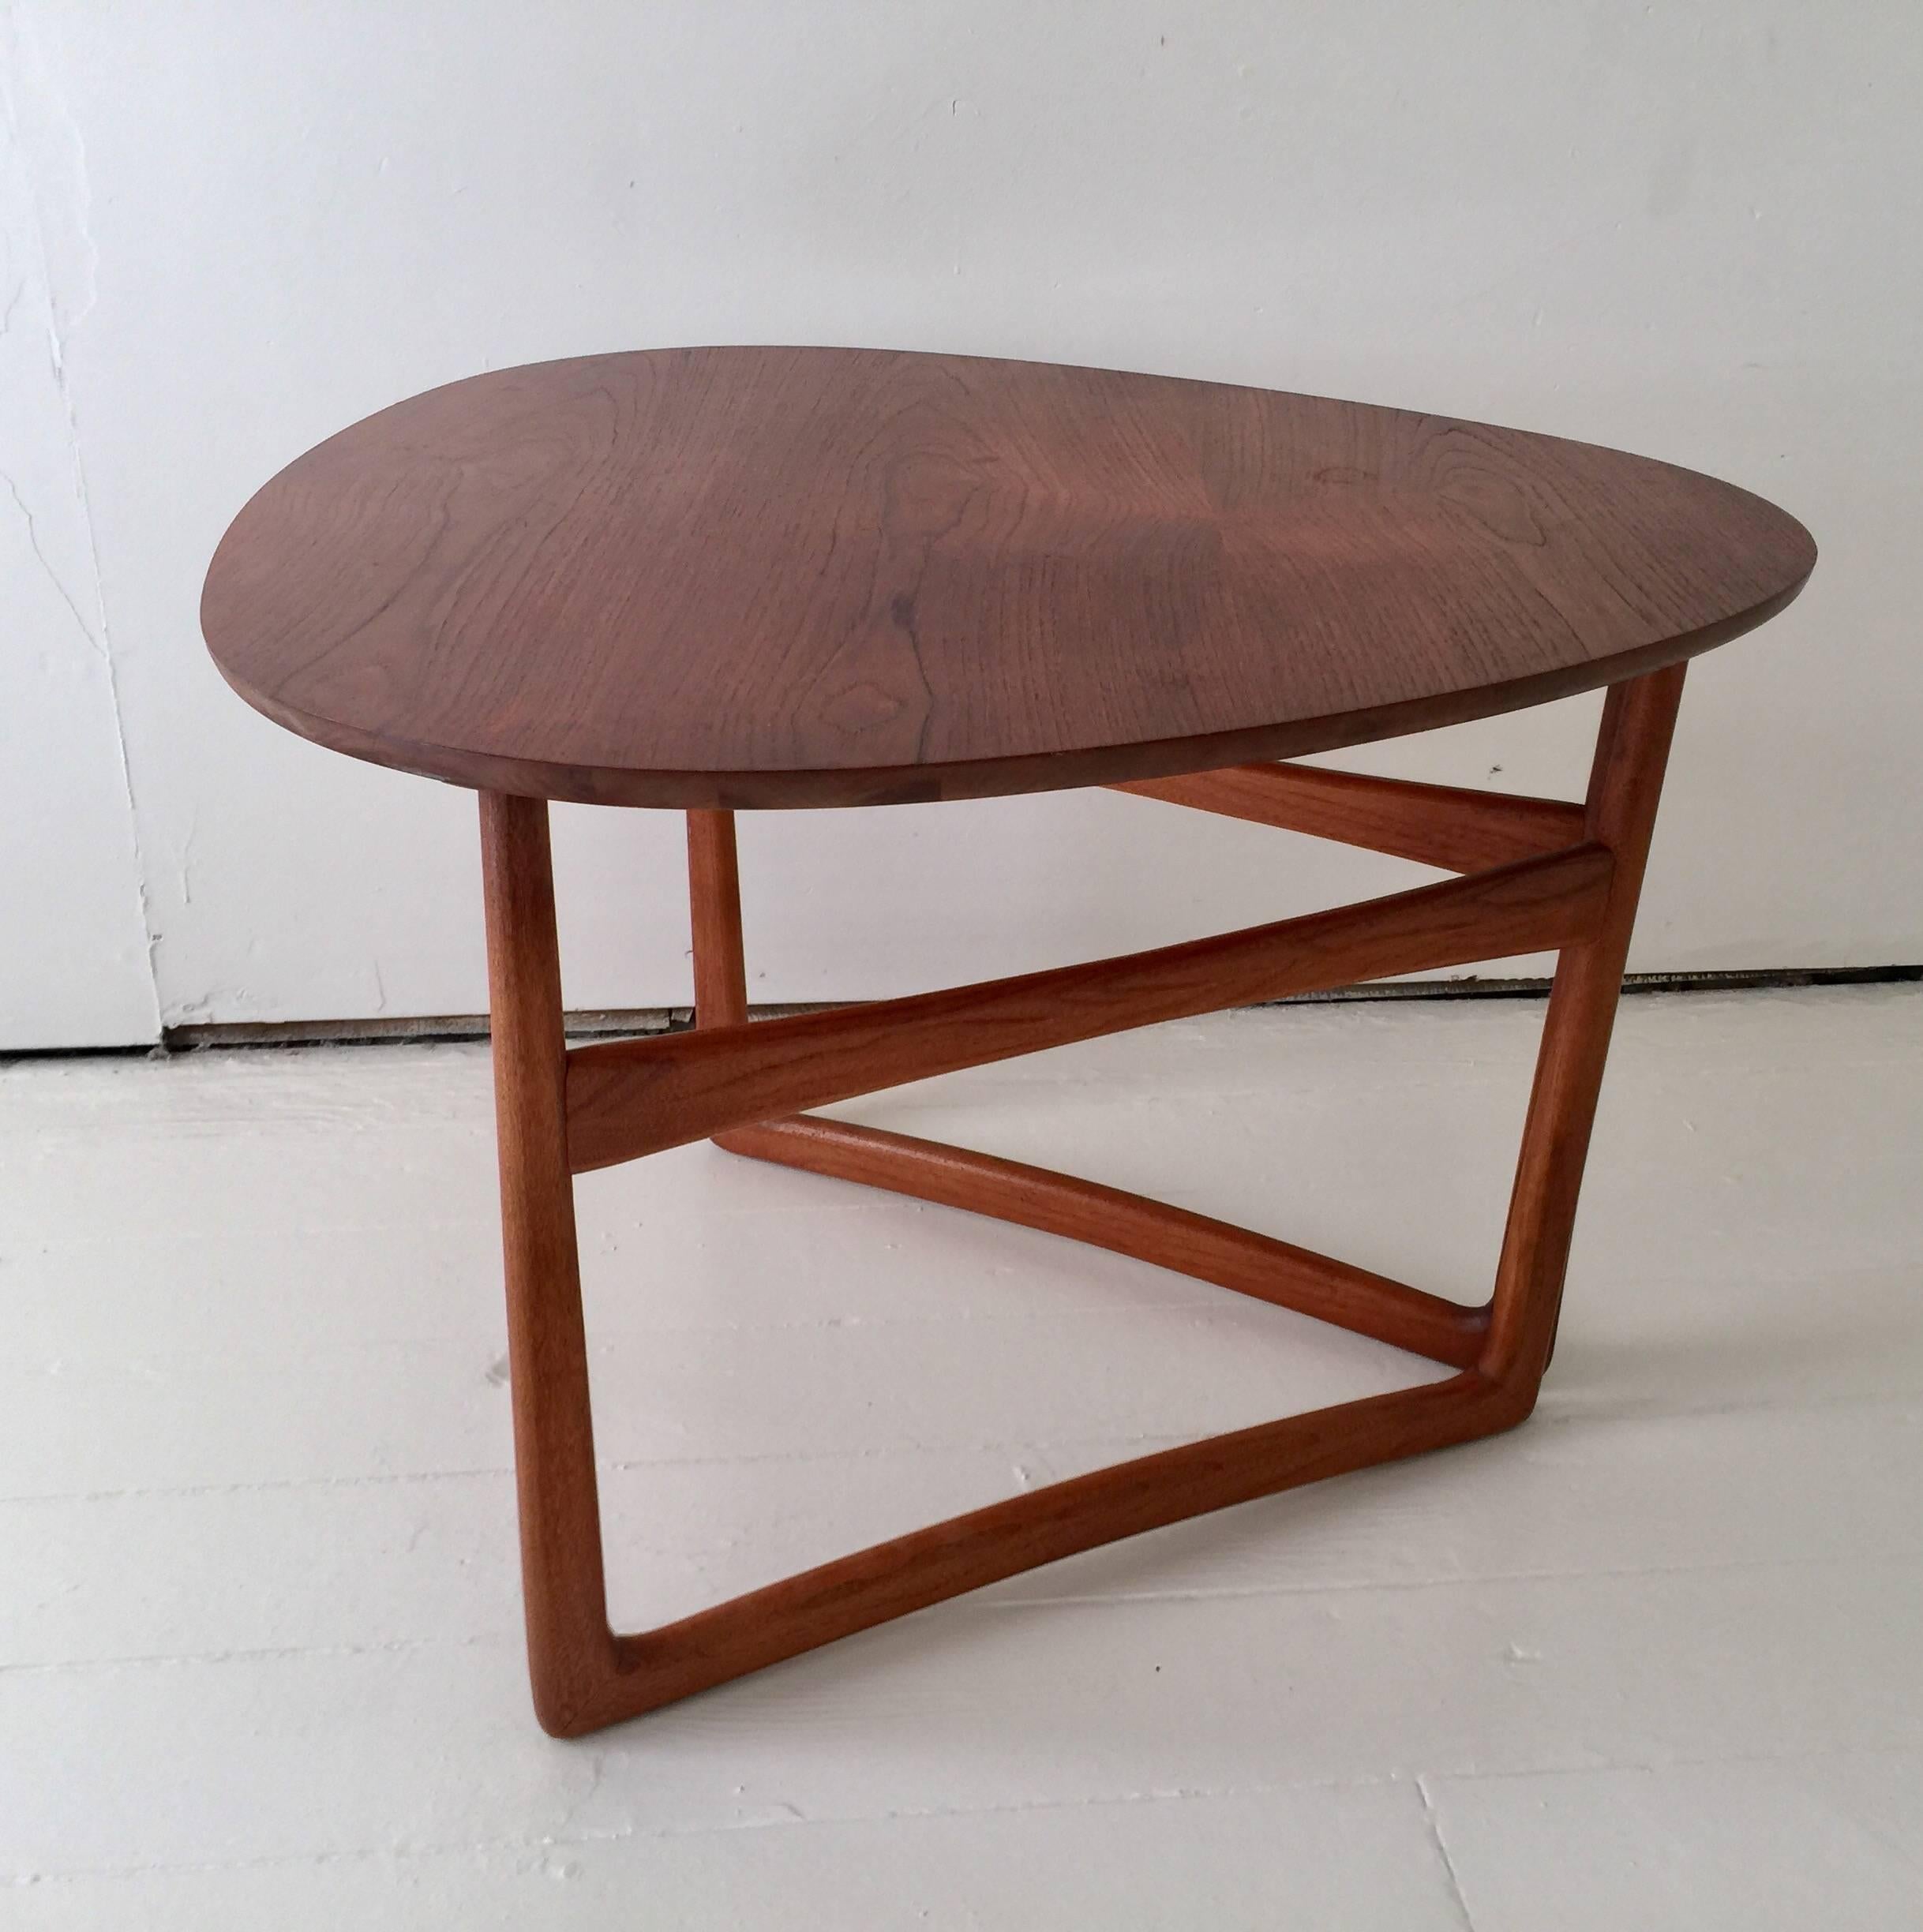 A collapsible side or occasional table in teak with folding gate legs and brass ball-joint detailing in the style of Peter Hvidt & Orla Mølgaard-Nielsen.

Marked and made by Lane. USA, circa 1950. 

One table available.